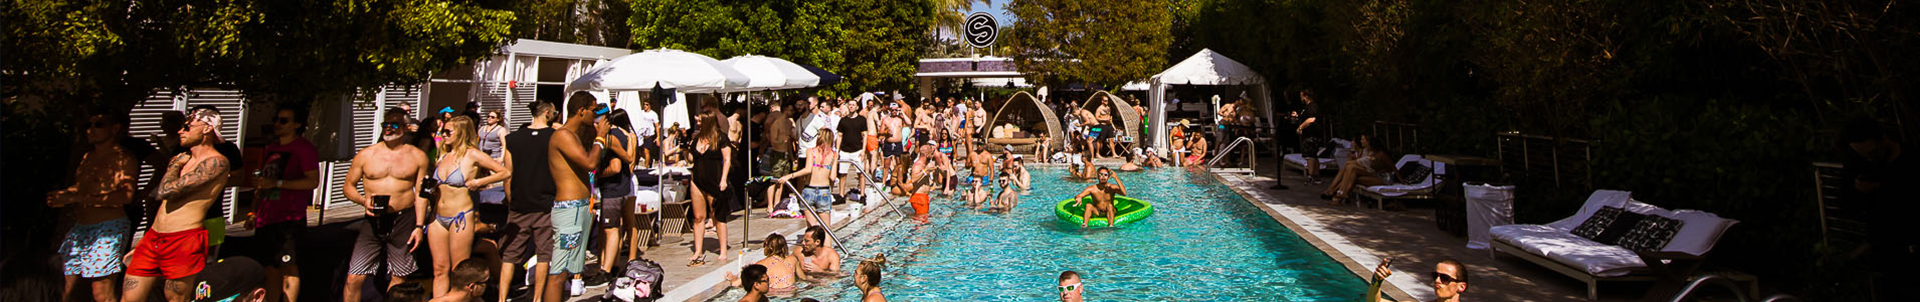 Spinnin' Hotel recap day 1: Awesome poolparty with Lucas & Steve, Steve Aoki, Mesto and many more!